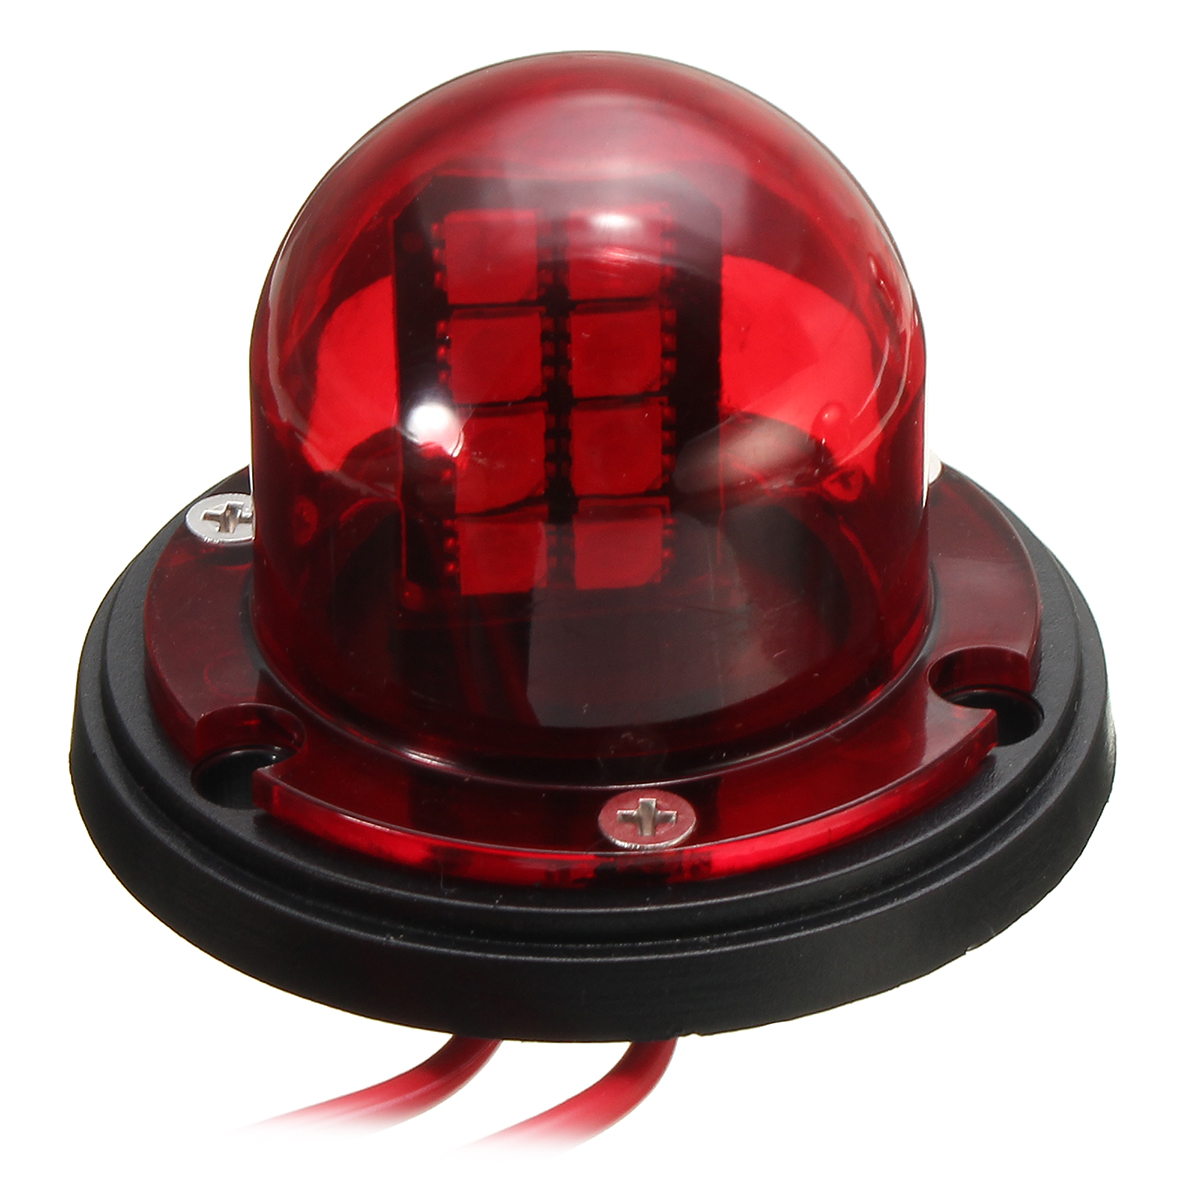 Yacht Light 12V Stainless Steel LED Bow Red Green Navigation Lights Marine Boat - Auto GoShop